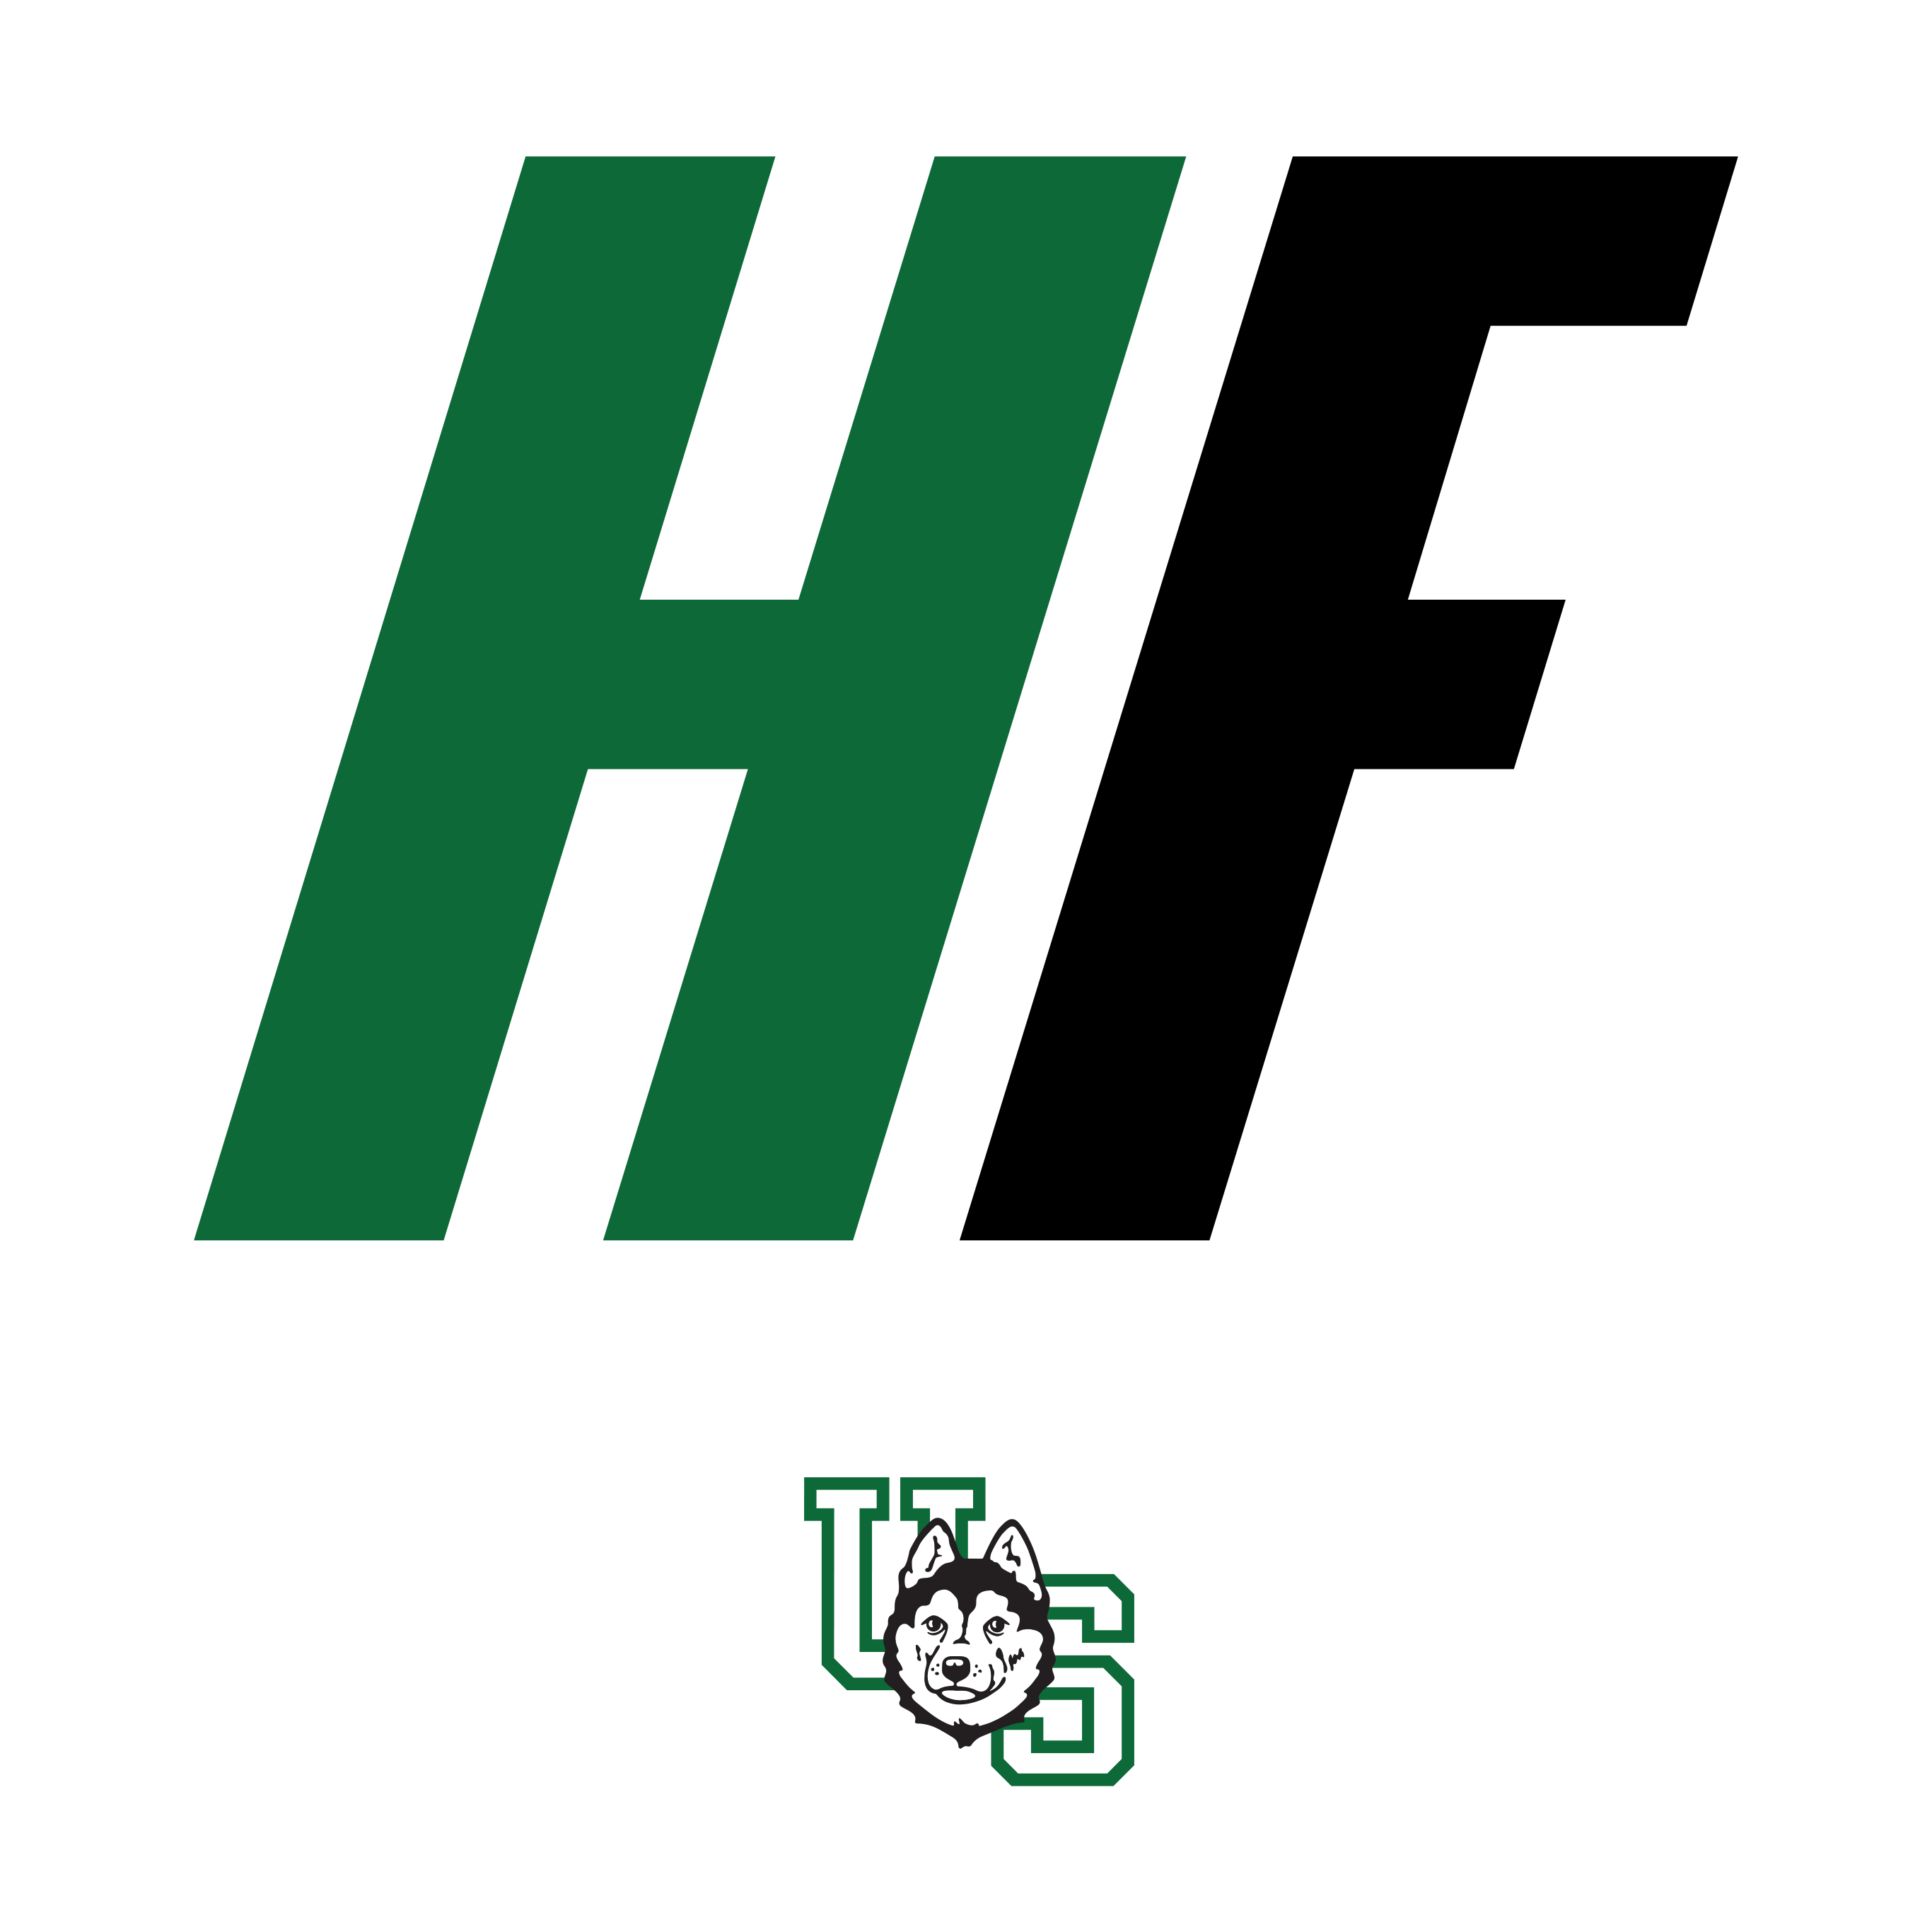 HuskieFAN Podcast – Coaches Show with Wray Morrison and Babcock (Nov. 25, 2021)